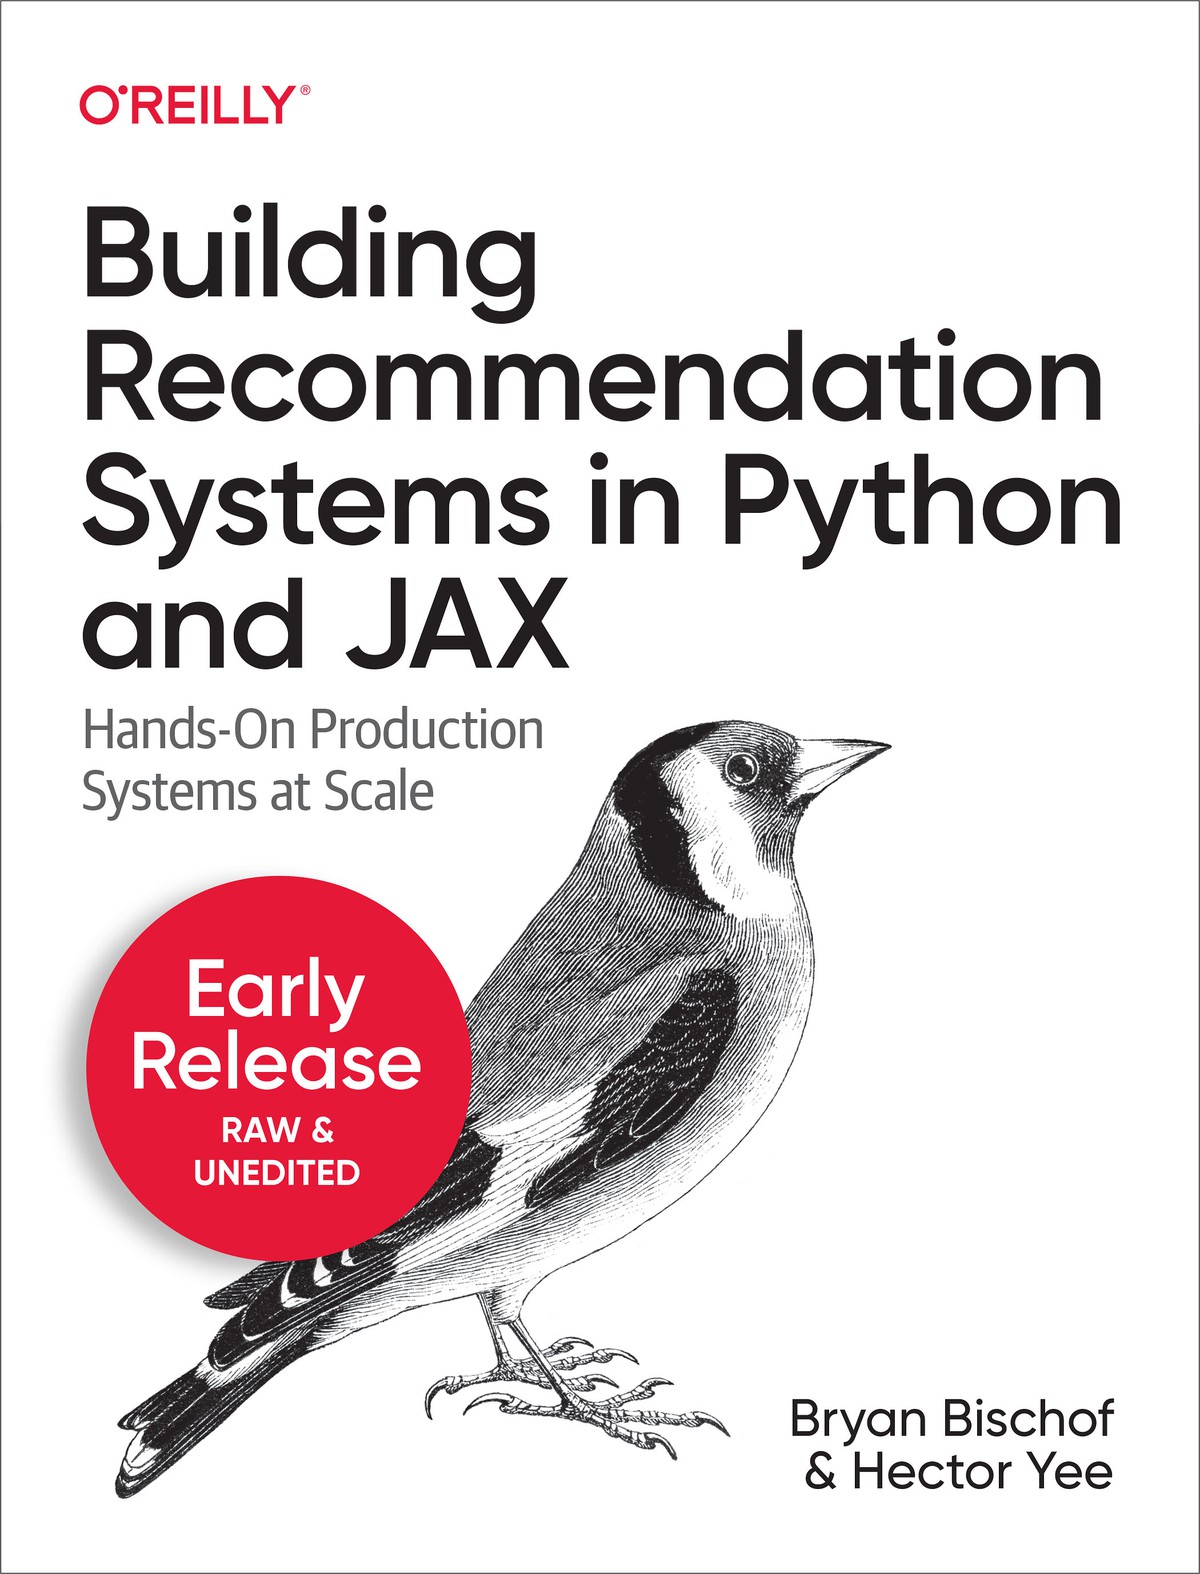 Building Production Recommendation Systems in Python and JAX